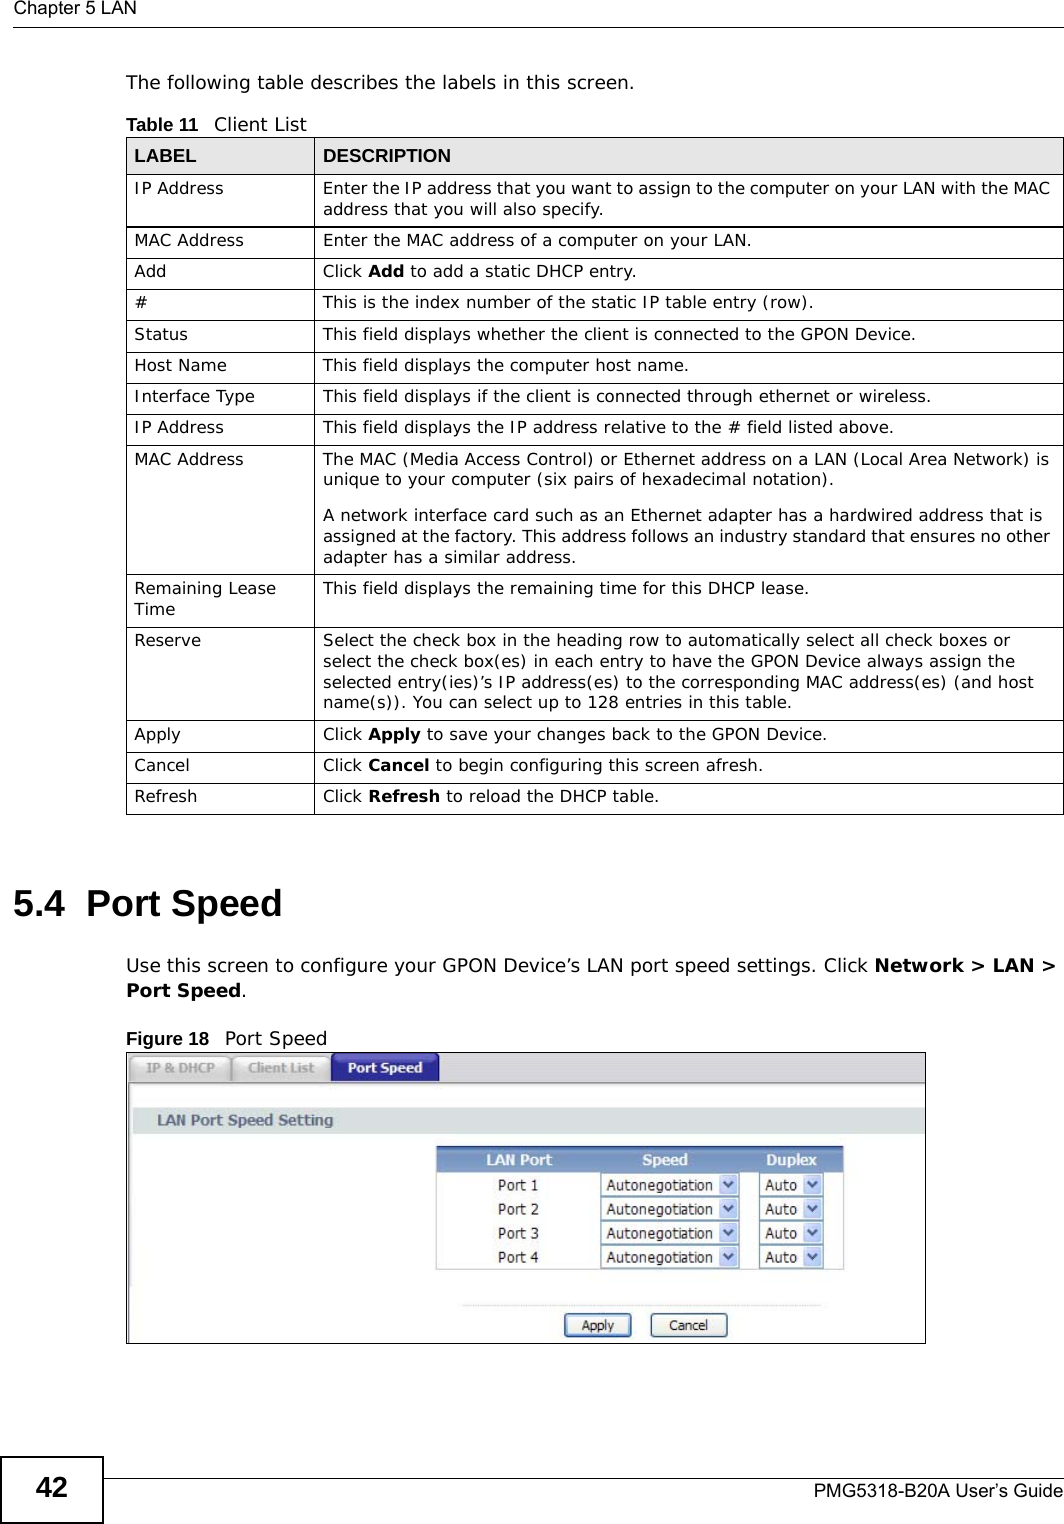 Chapter 5 LANPMG5318-B20A User’s Guide42The following table describes the labels in this screen. 5.4  Port SpeedUse this screen to configure your GPON Device’s LAN port speed settings. Click Network &gt; LAN &gt; Port Speed.Figure 18   Port Speed  Table 11   Client ListLABEL DESCRIPTIONIP Address Enter the IP address that you want to assign to the computer on your LAN with the MAC address that you will also specify.MAC Address Enter the MAC address of a computer on your LAN.Add Click Add to add a static DHCP entry. # This is the index number of the static IP table entry (row).Status This field displays whether the client is connected to the GPON Device.Host Name  This field displays the computer host name.Interface Type This field displays if the client is connected through ethernet or wireless.IP Address This field displays the IP address relative to the # field listed above.MAC Address The MAC (Media Access Control) or Ethernet address on a LAN (Local Area Network) is unique to your computer (six pairs of hexadecimal notation).A network interface card such as an Ethernet adapter has a hardwired address that is assigned at the factory. This address follows an industry standard that ensures no other adapter has a similar address.Remaining Lease Time This field displays the remaining time for this DHCP lease.Reserve Select the check box in the heading row to automatically select all check boxes or select the check box(es) in each entry to have the GPON Device always assign the selected entry(ies)’s IP address(es) to the corresponding MAC address(es) (and host name(s)). You can select up to 128 entries in this table.  Apply Click Apply to save your changes back to the GPON Device.Cancel Click Cancel to begin configuring this screen afresh.Refresh Click Refresh to reload the DHCP table.